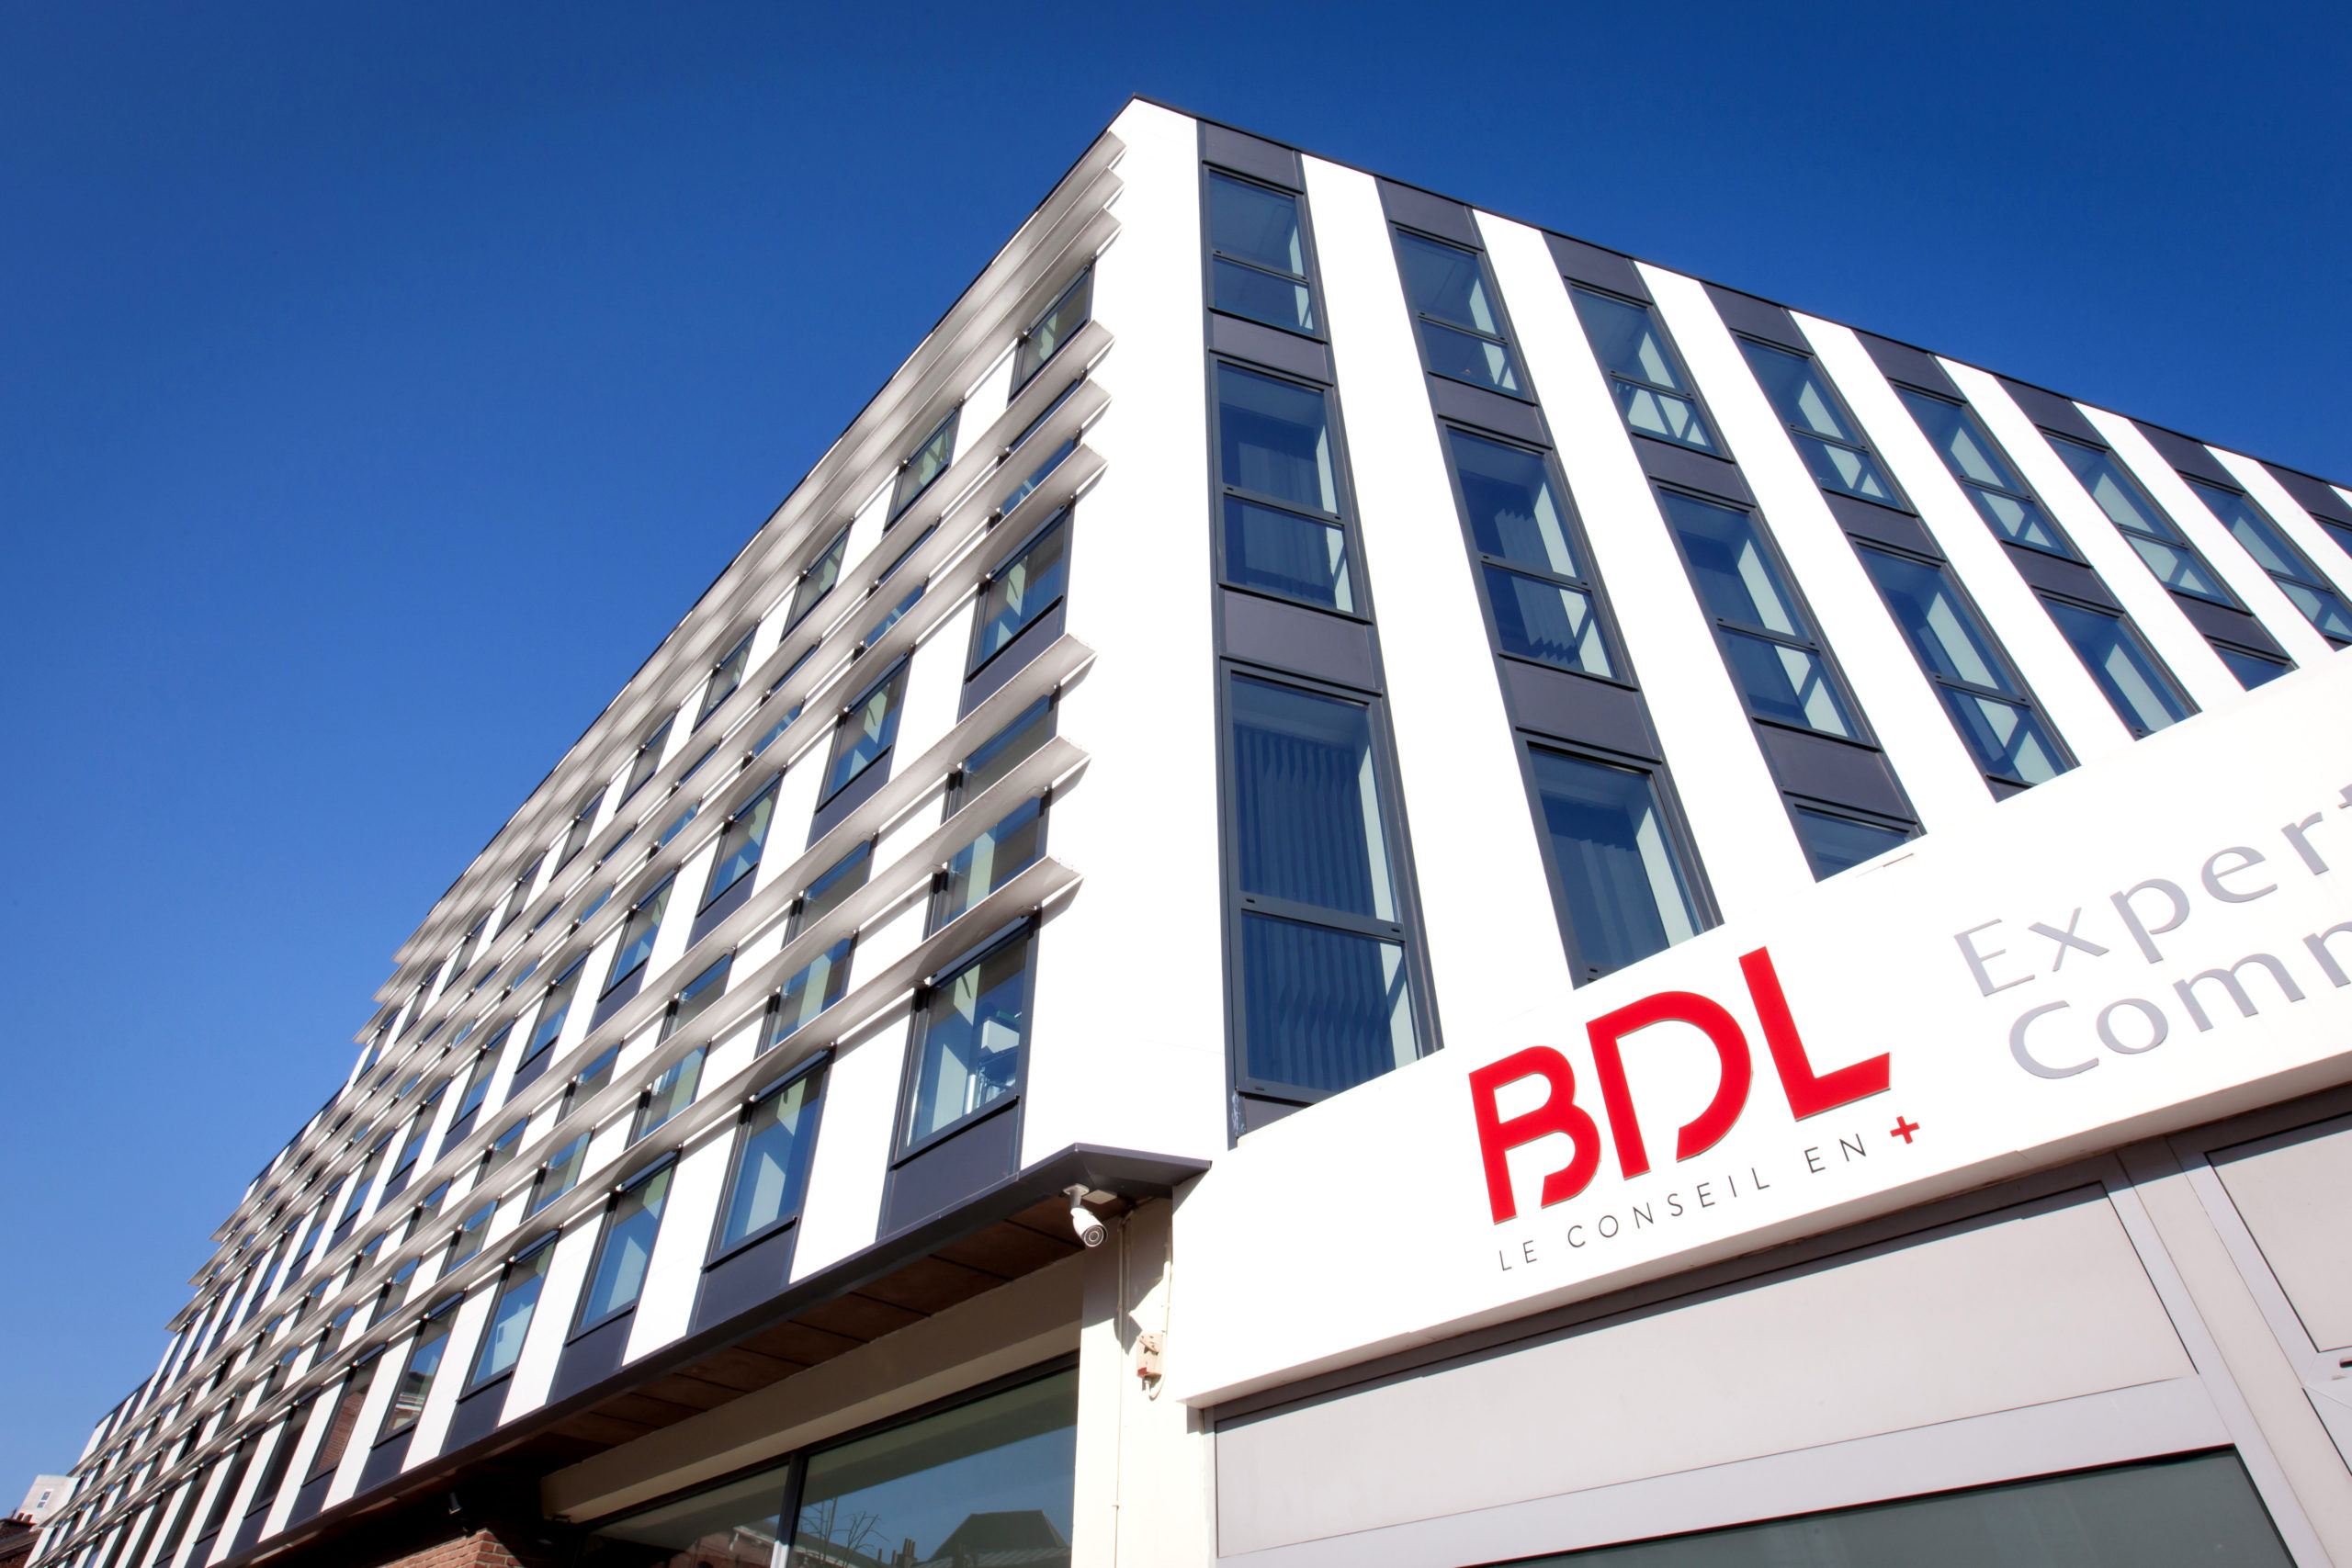 BDL Valenciennes expertise comptable